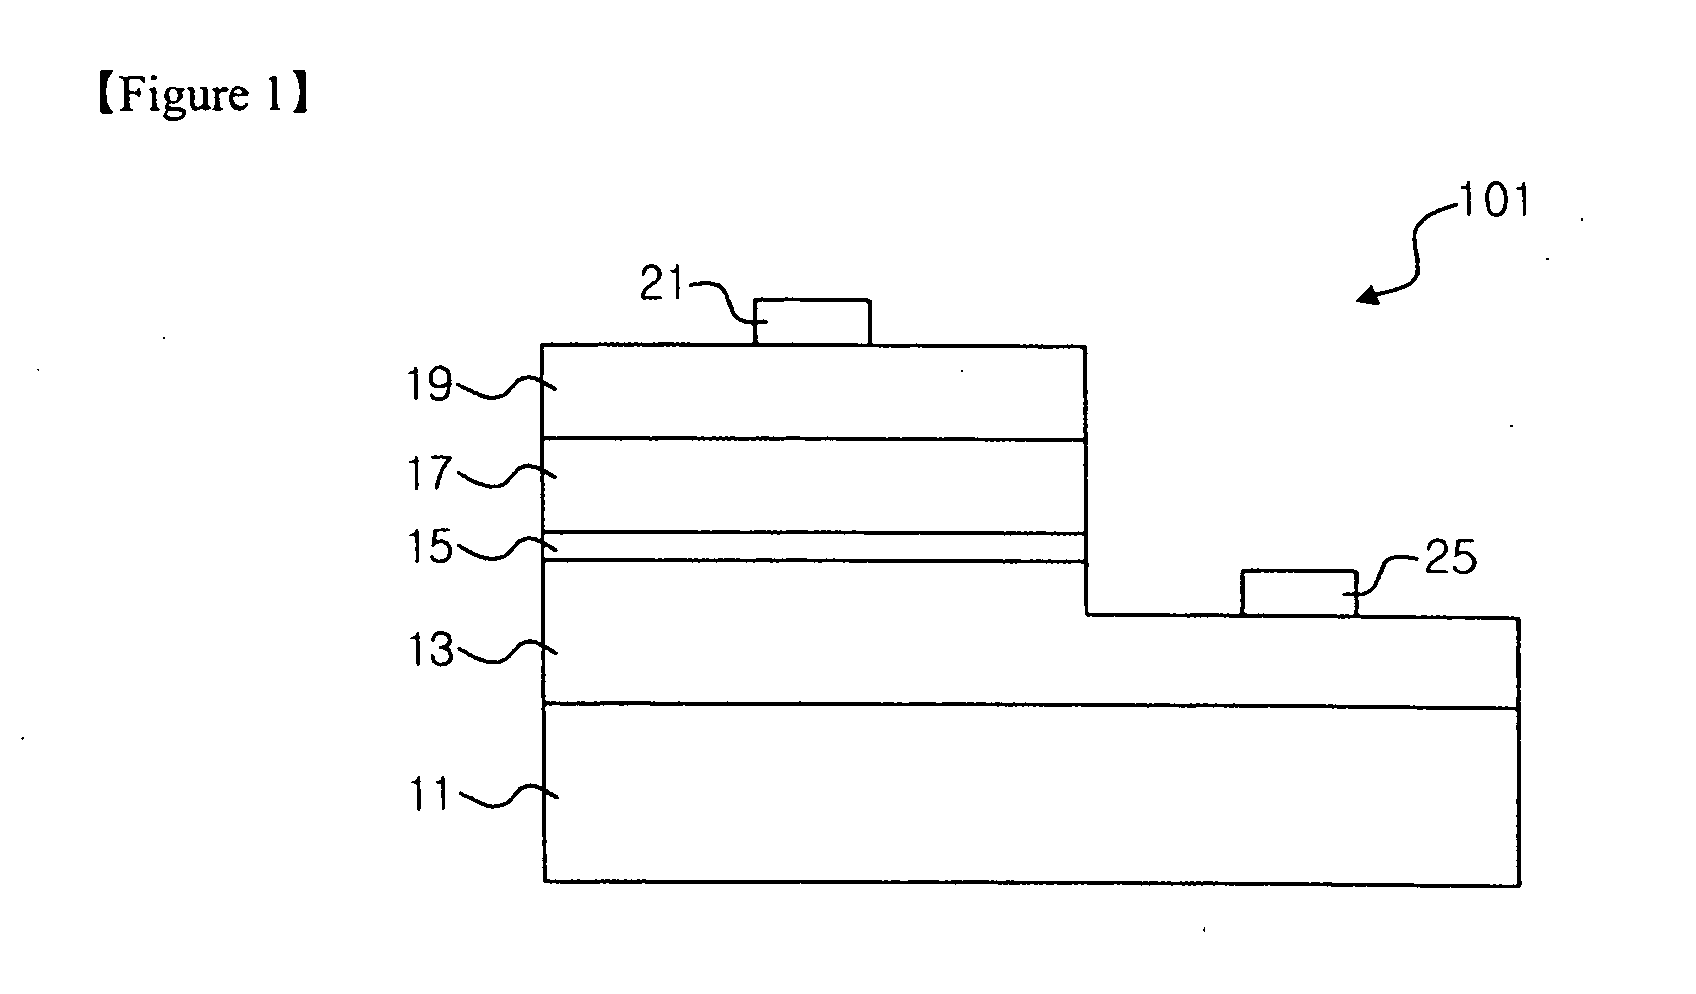 (Al, Ga, In) N-based compound semiconductor and method of fabricating the same